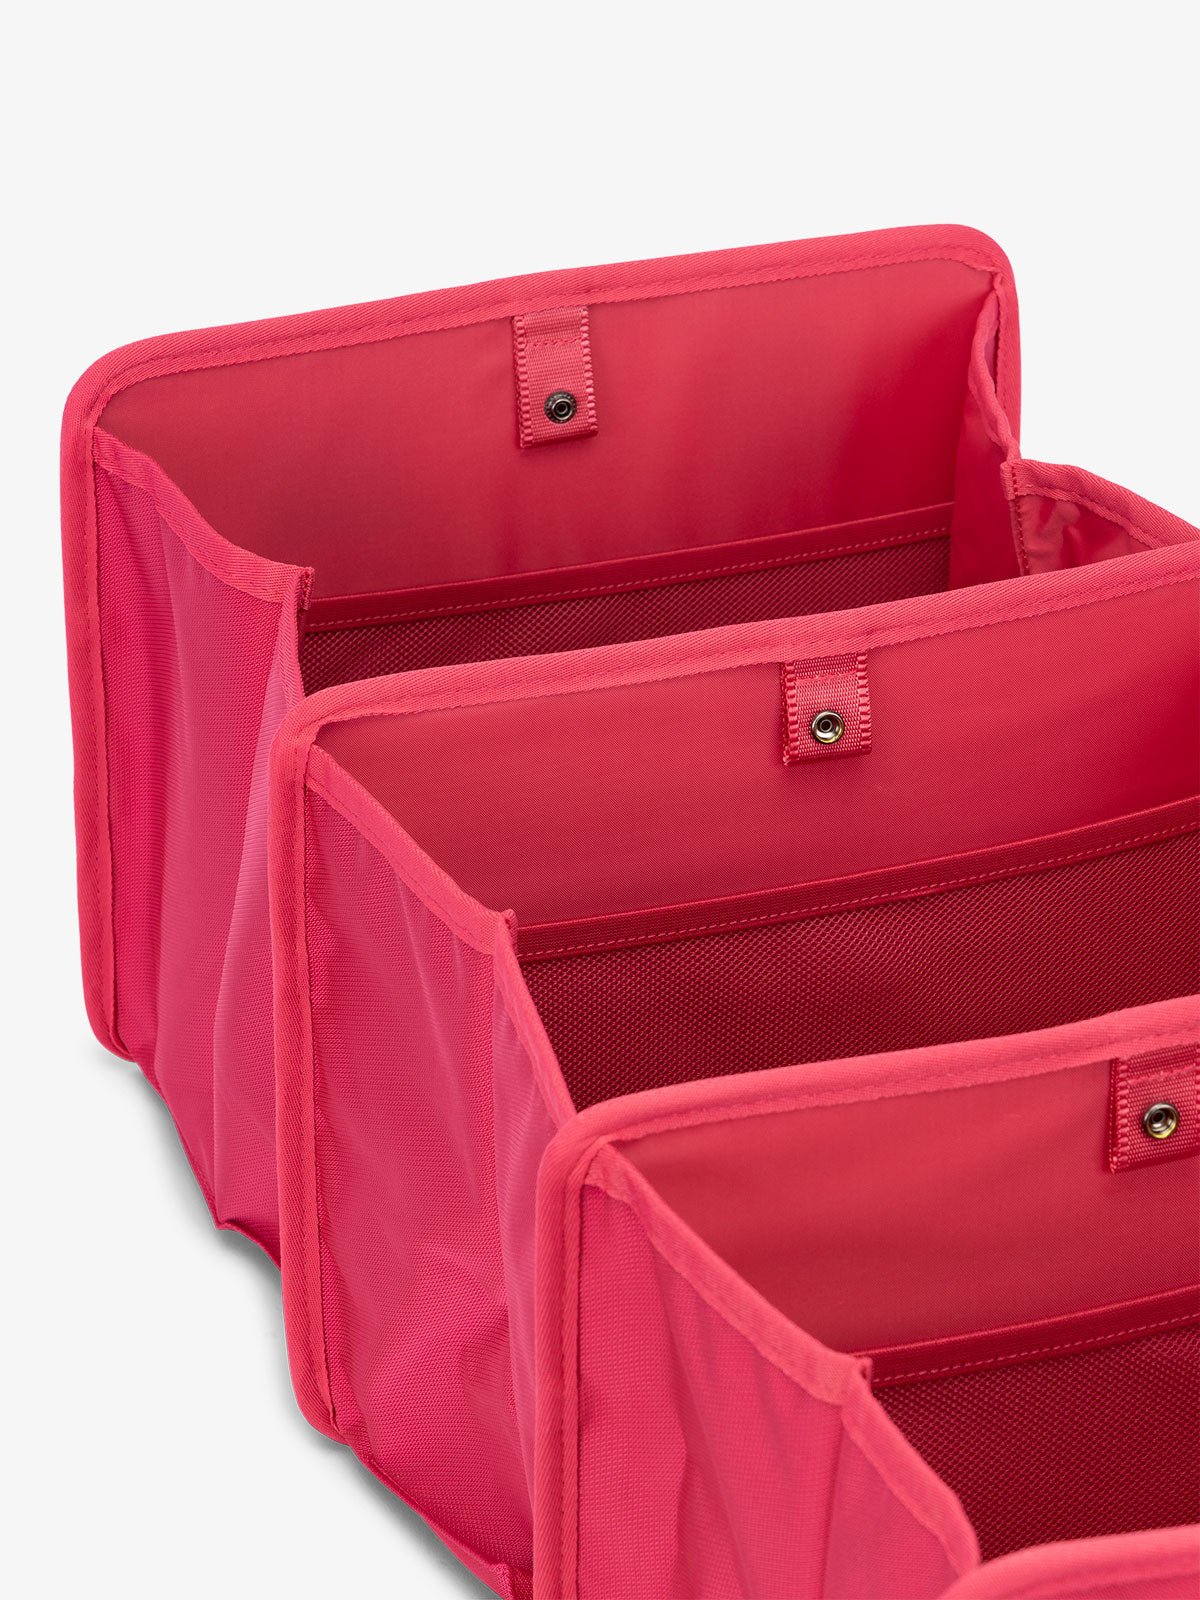 CALPAK collapsible car trunk organizer featuring compartments in pink dragonfruit